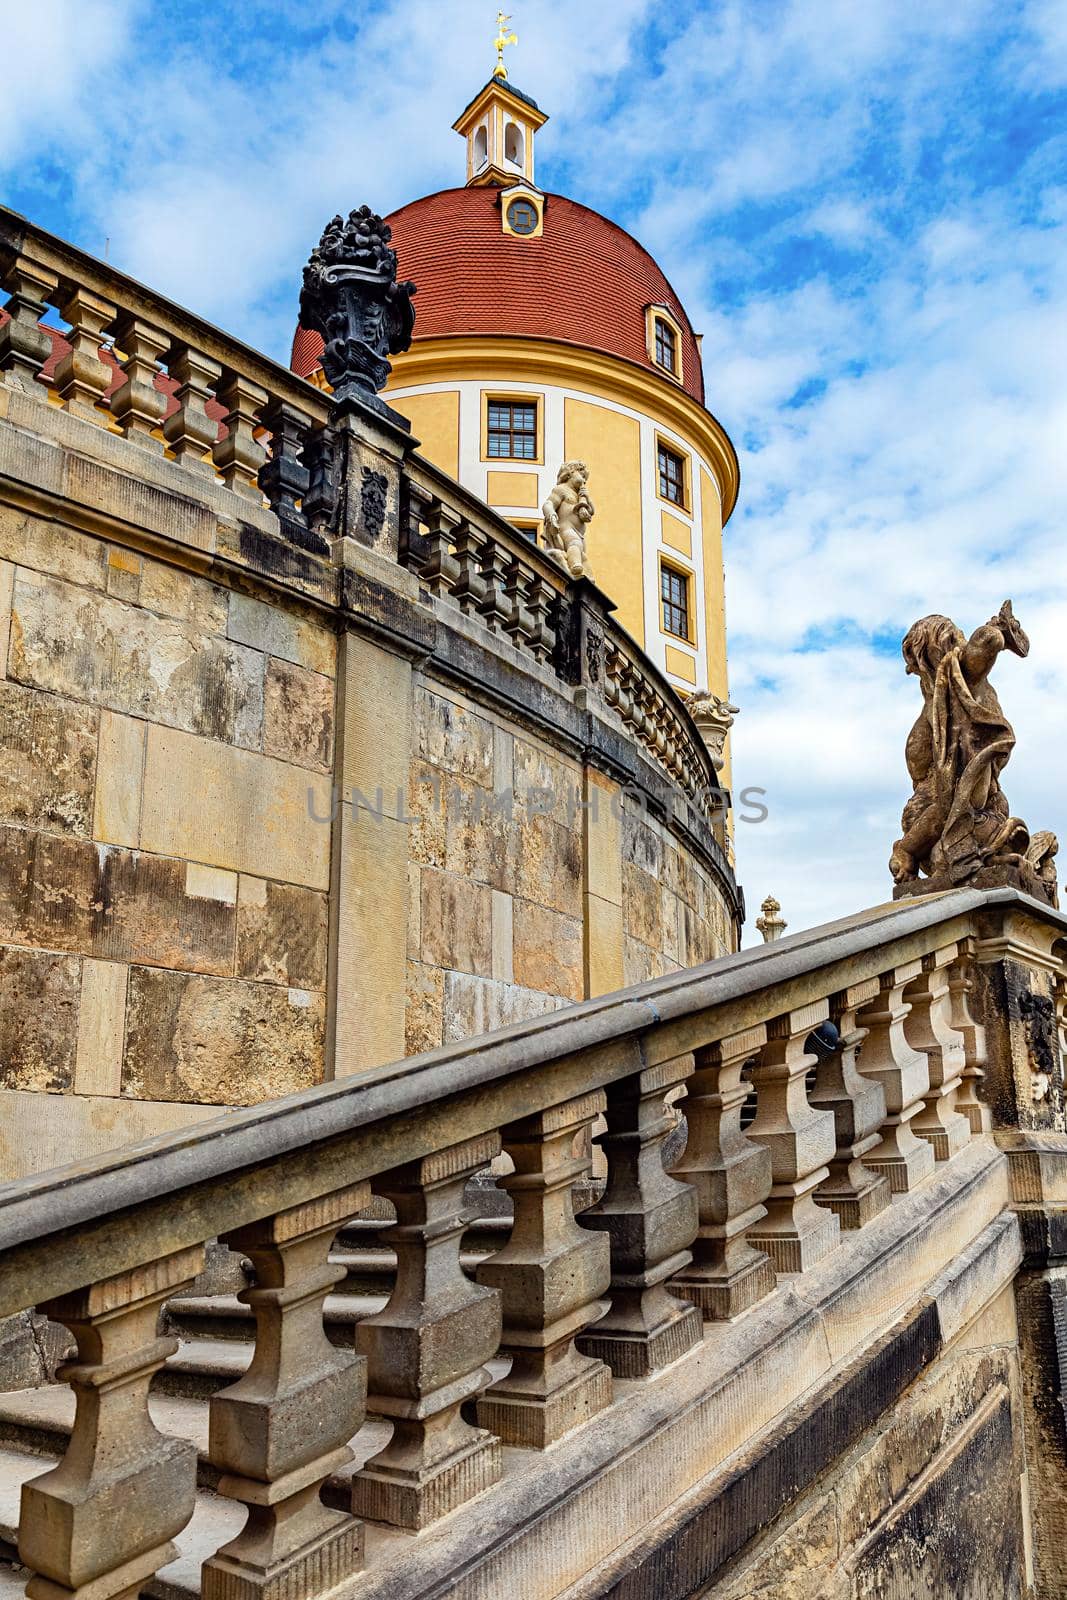 Baroque Moritzburg Castle, a staircase with sculptures leading to the Moritzburg Castle, Moritzburg near Dresden, Saxony, Germany.